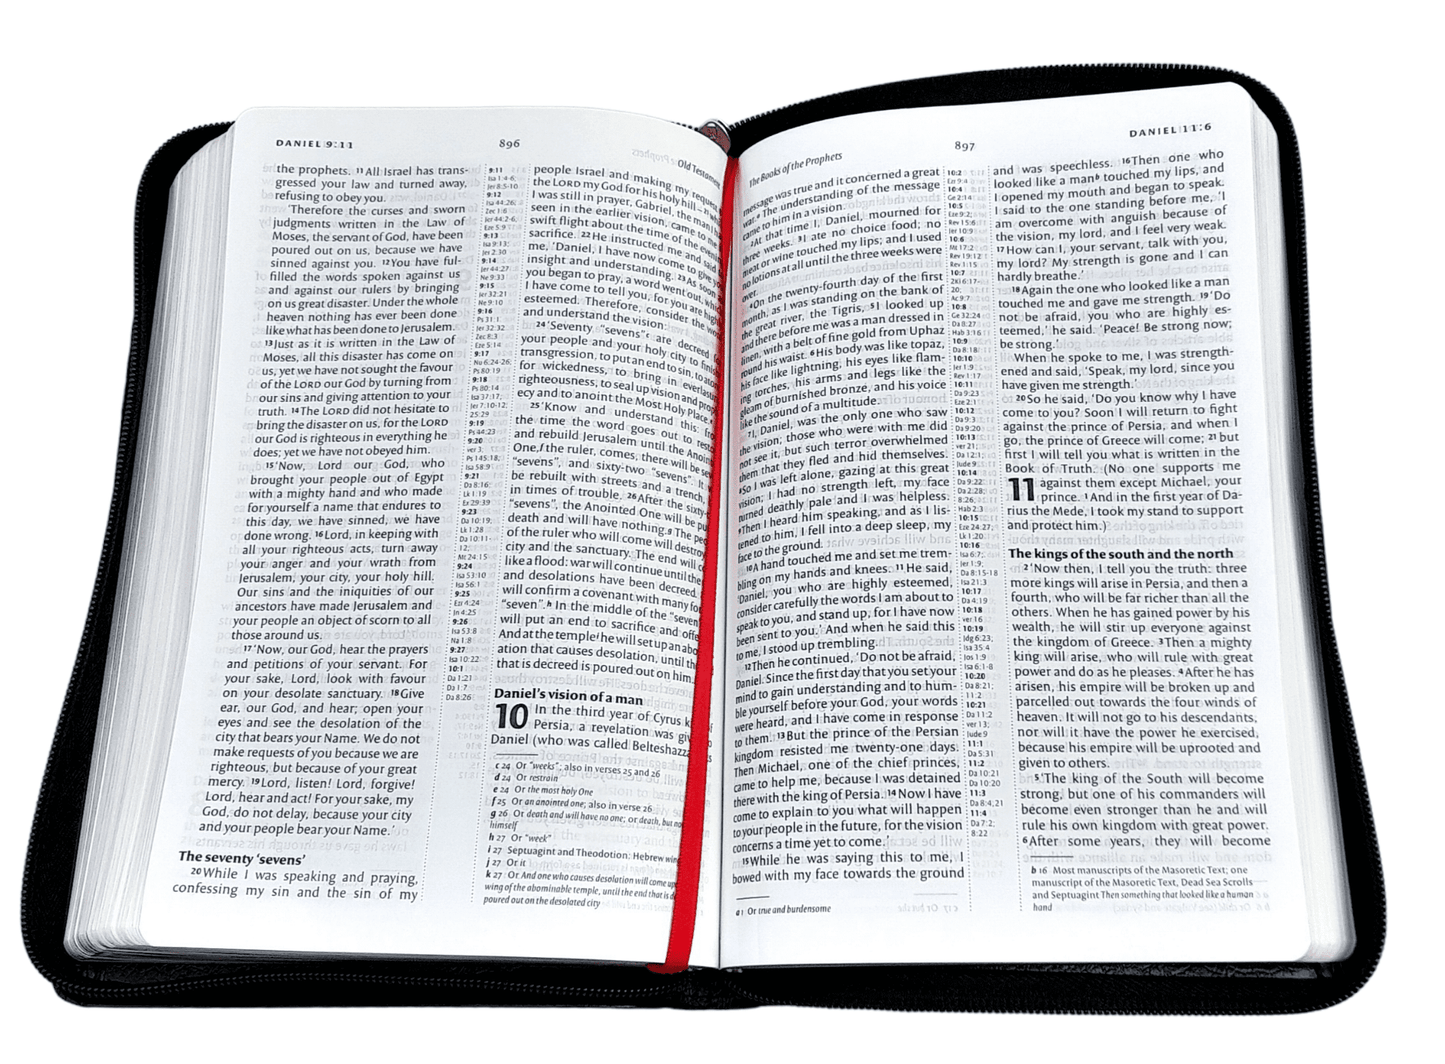 The Holy English Bible NIV Cross-Reference With Concordance Red Letter Edition Bible With Leather Cover , New Interational Version , ROYAL BL CR-REF CONC.RL